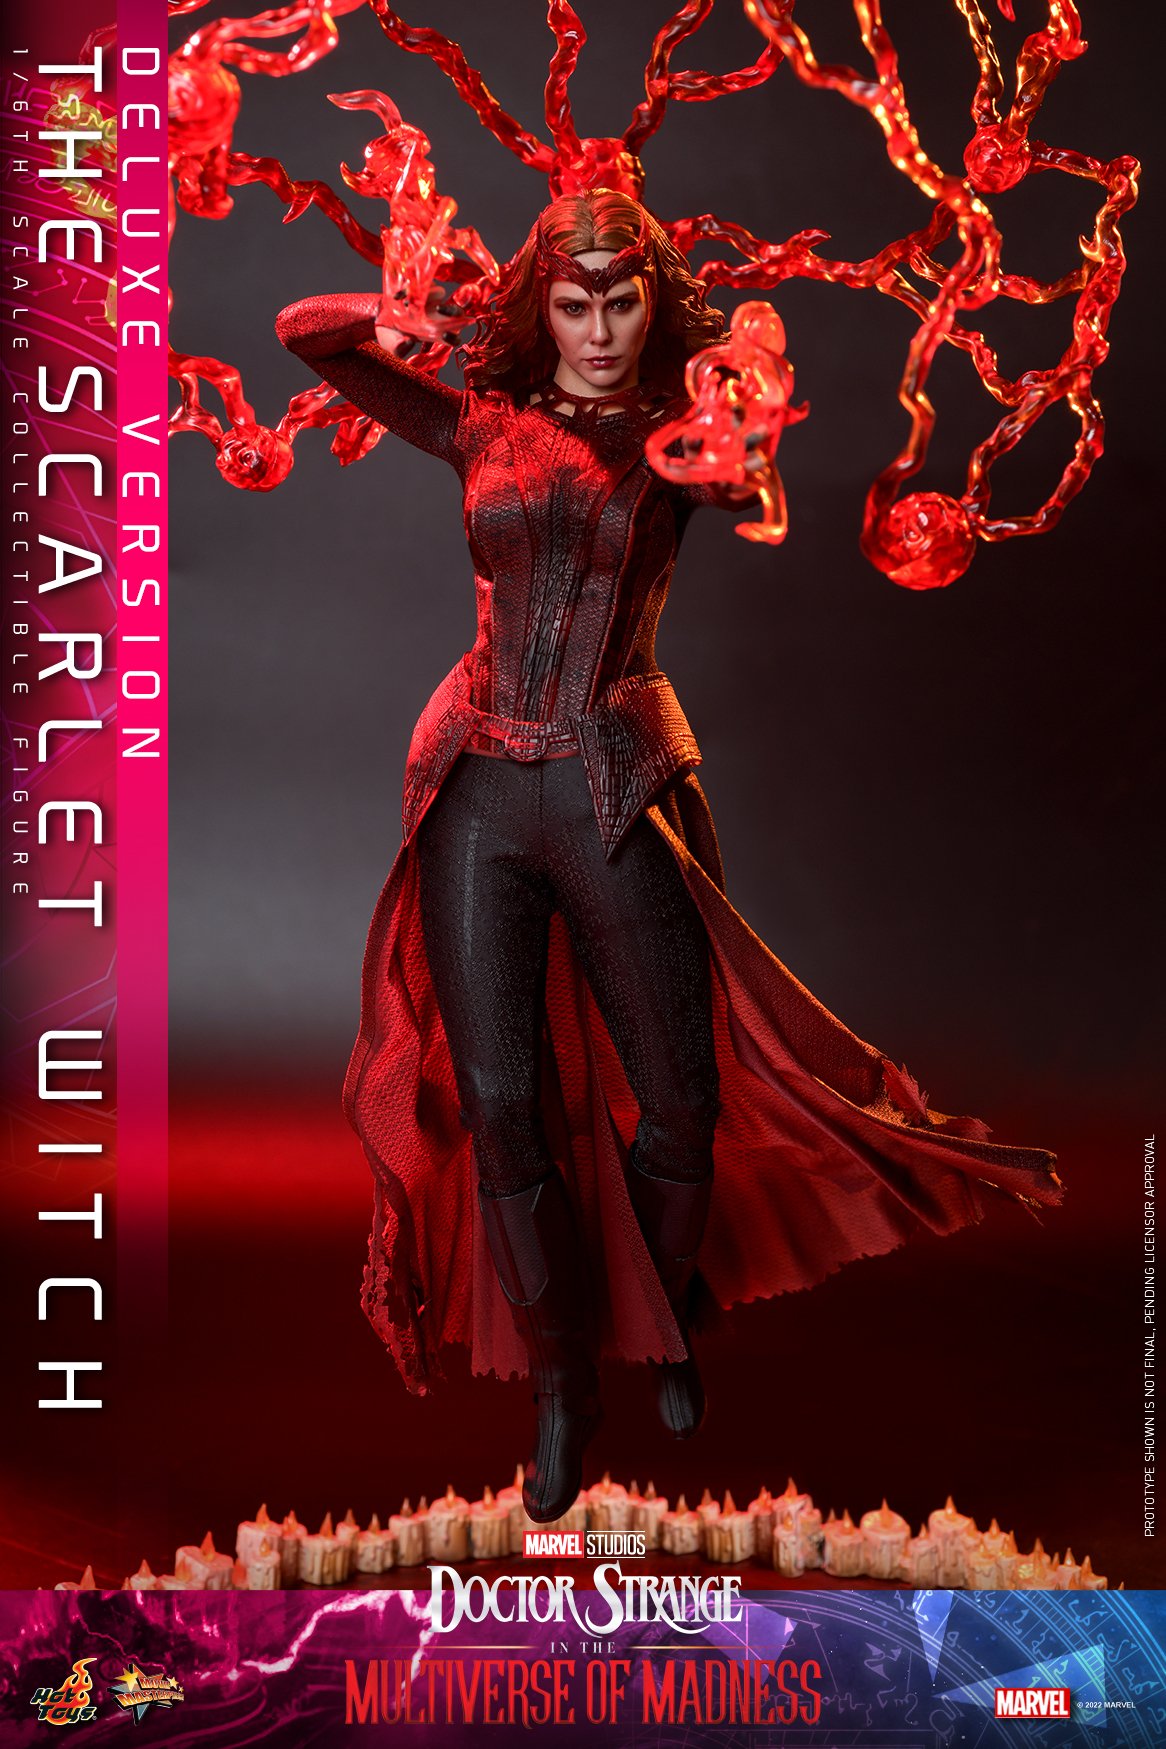 Hot-Toy-Multiverse-of-Madness-Scarlet-Witch-DX-005.jpg